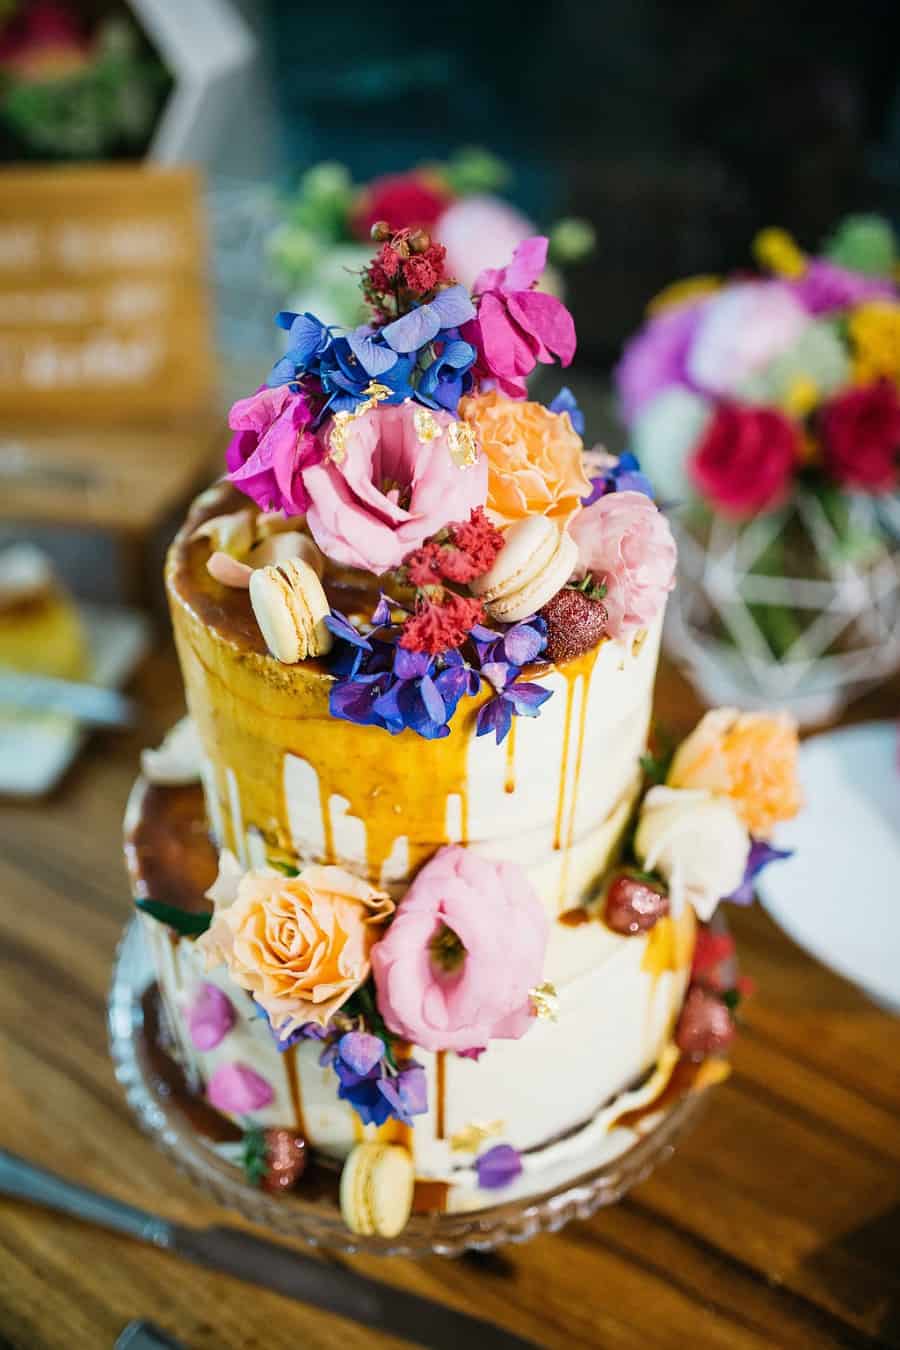 Best wedding cakes of 2016 - artful drip cake with macarons